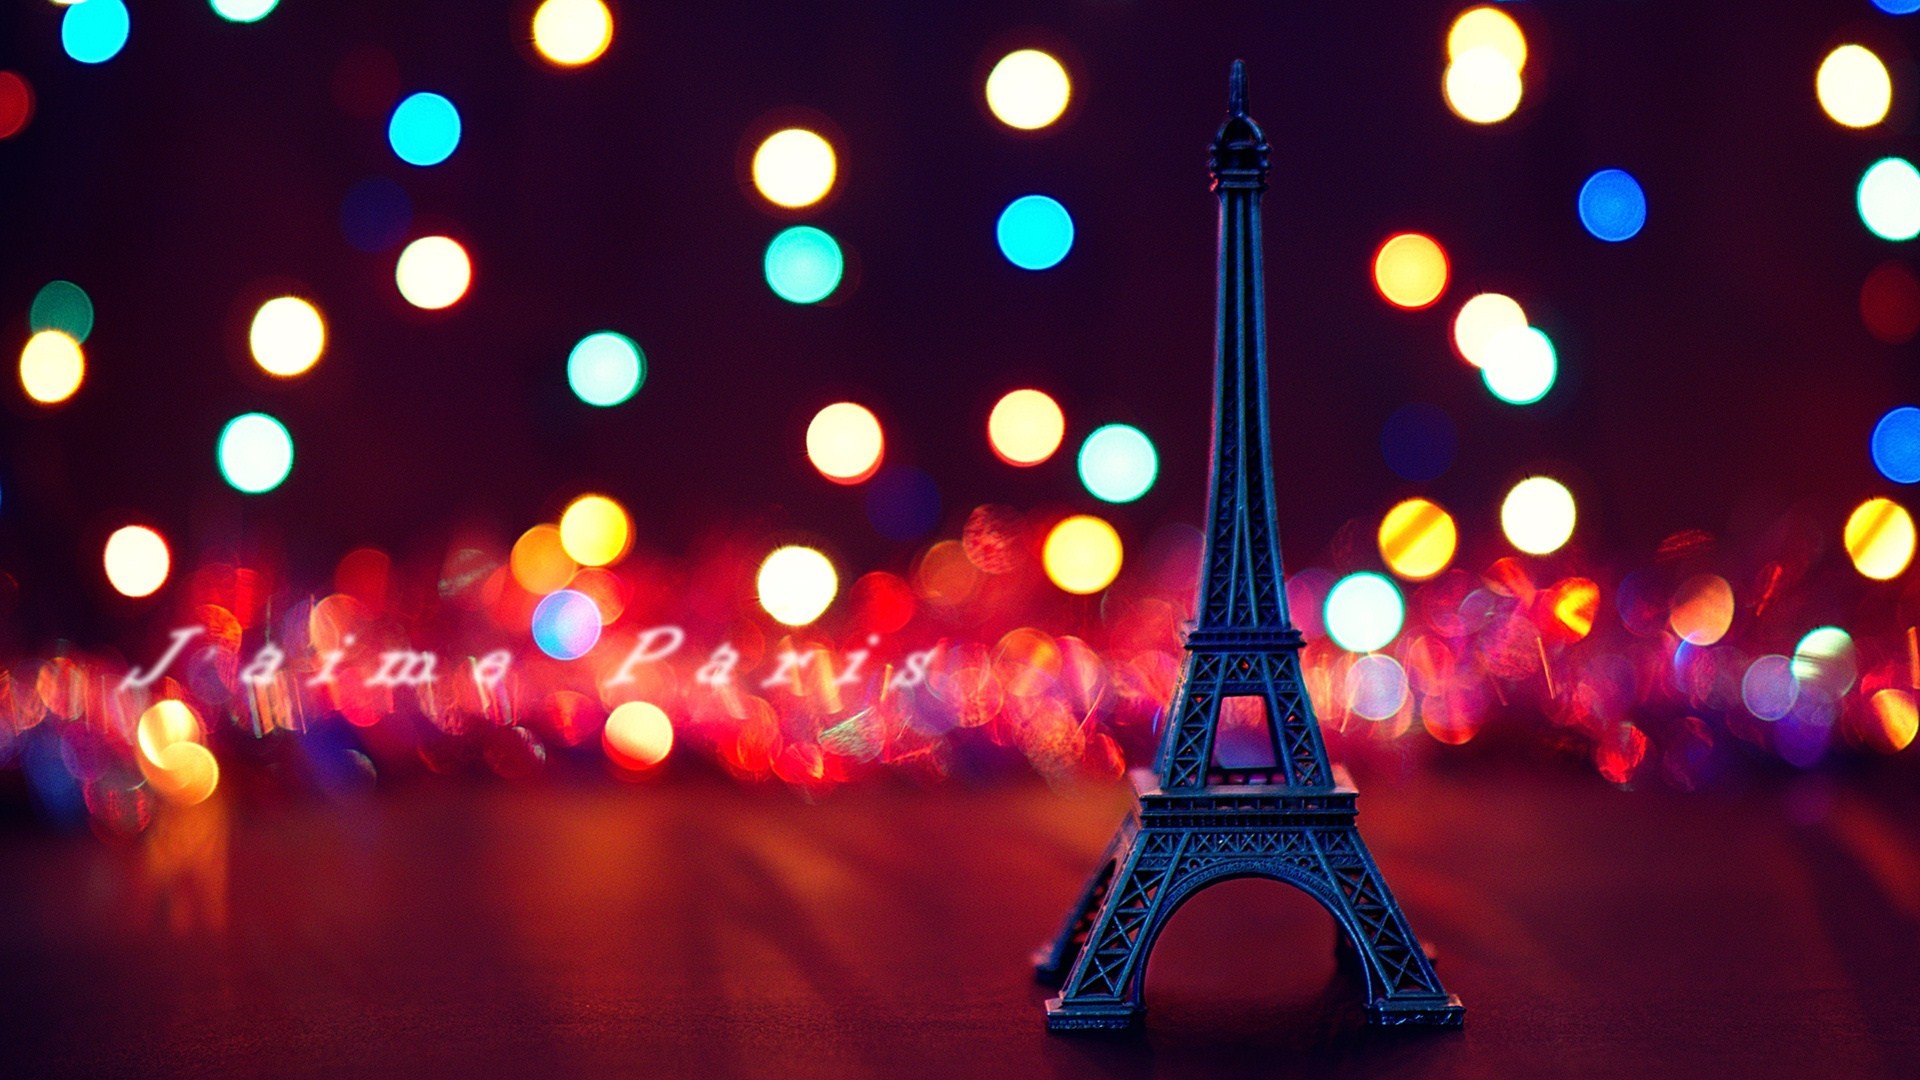 1920x1080 Attachment file to download of Amazing Cute Eiffel Tower HD Wallpapers.